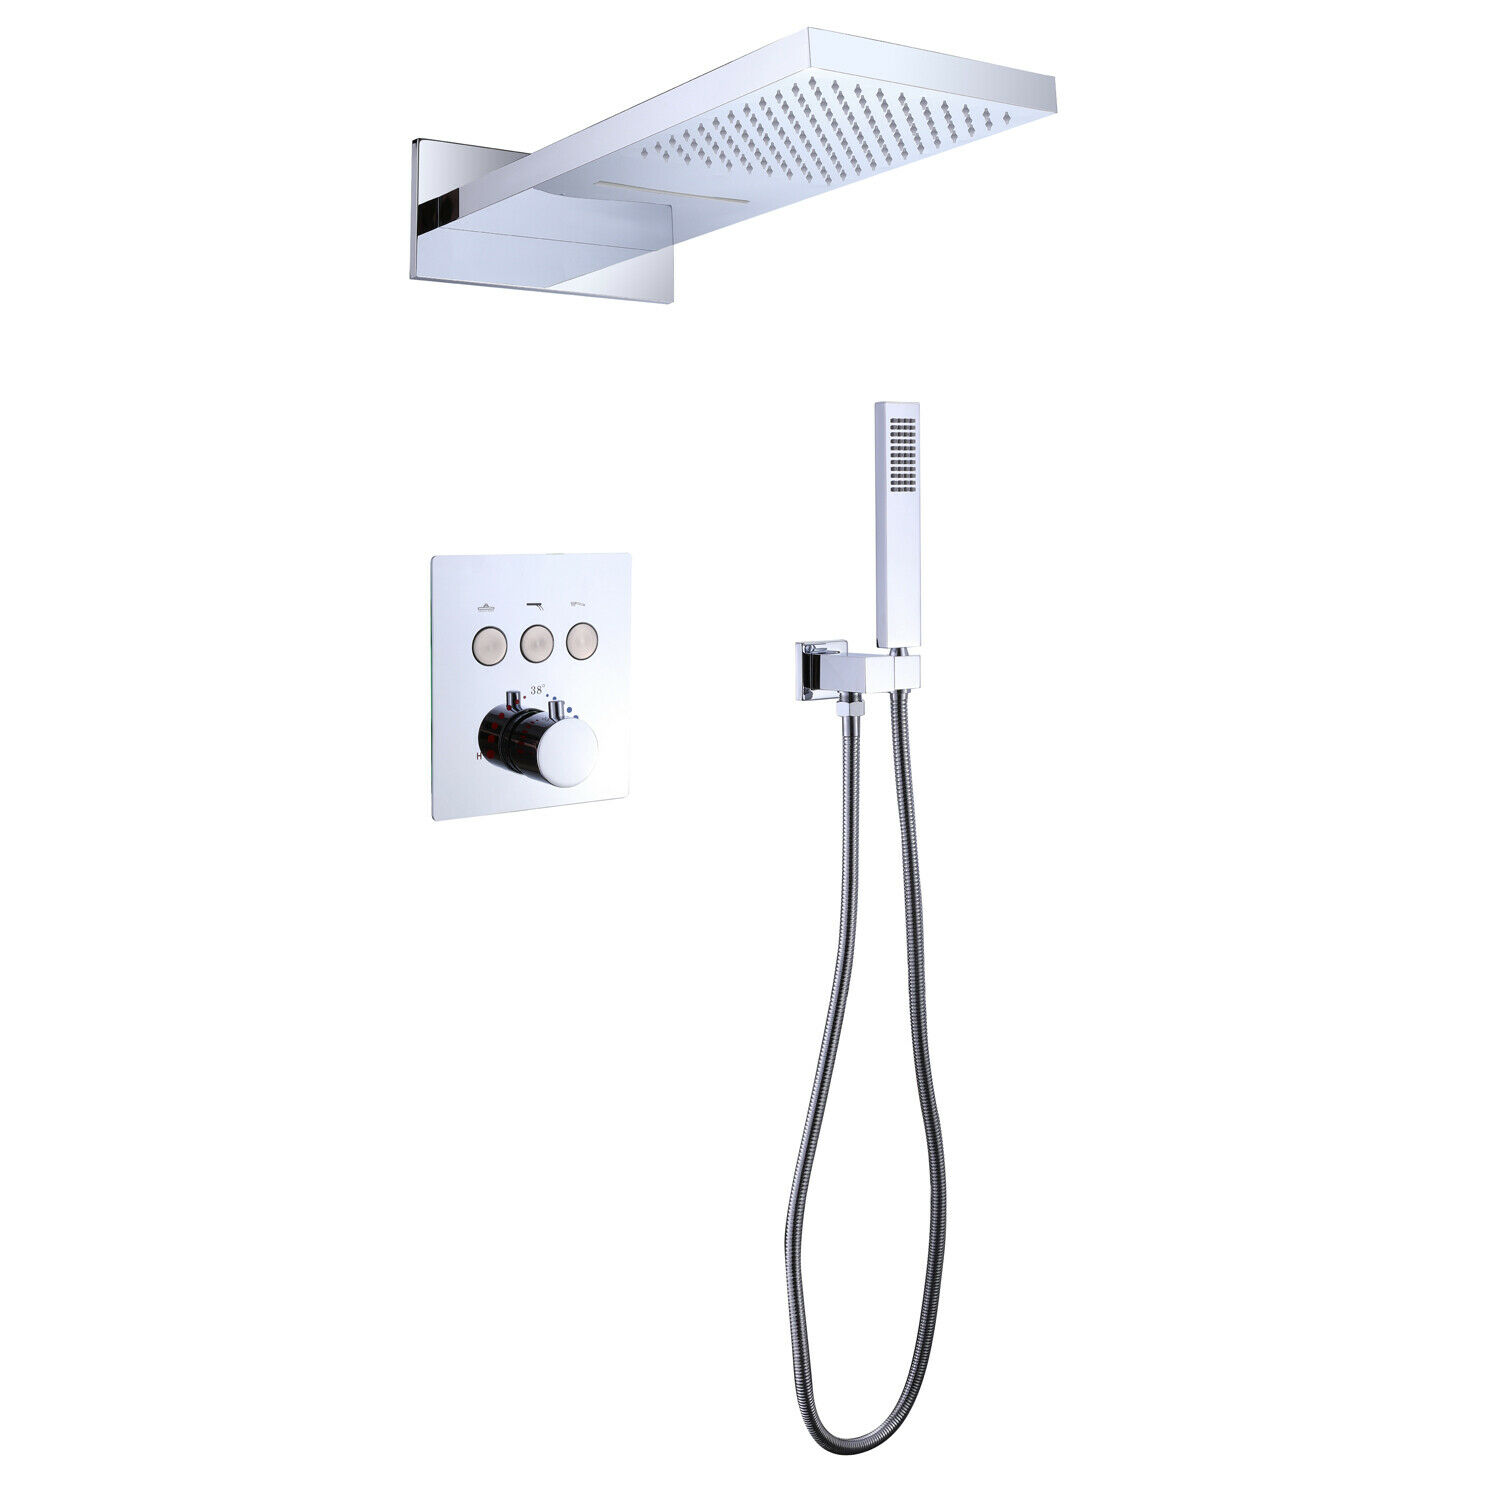 2-Spray Patterns Wall Mount Dual Shower Heads And Handheld Shower With Pressure Balance Valve in Chrome